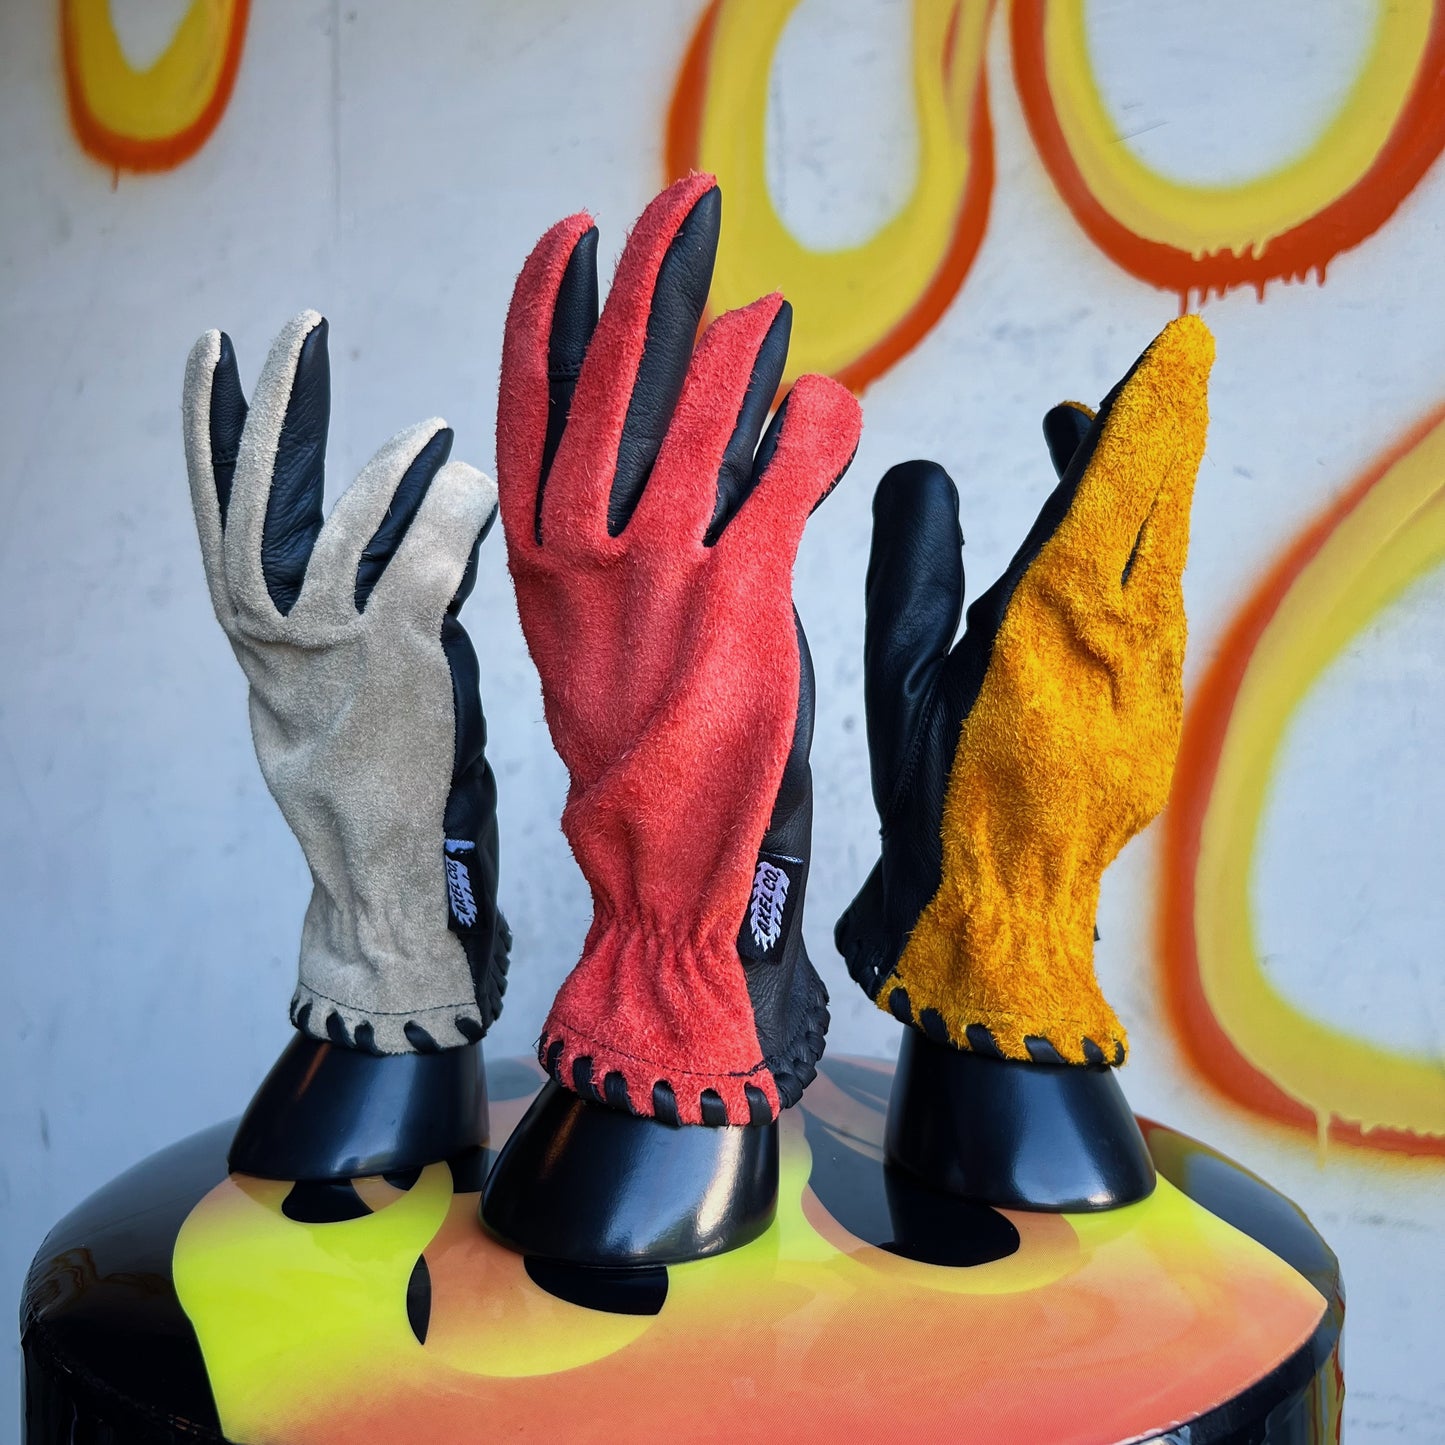 Axel Co  Suede Top Motorcycle Gloves